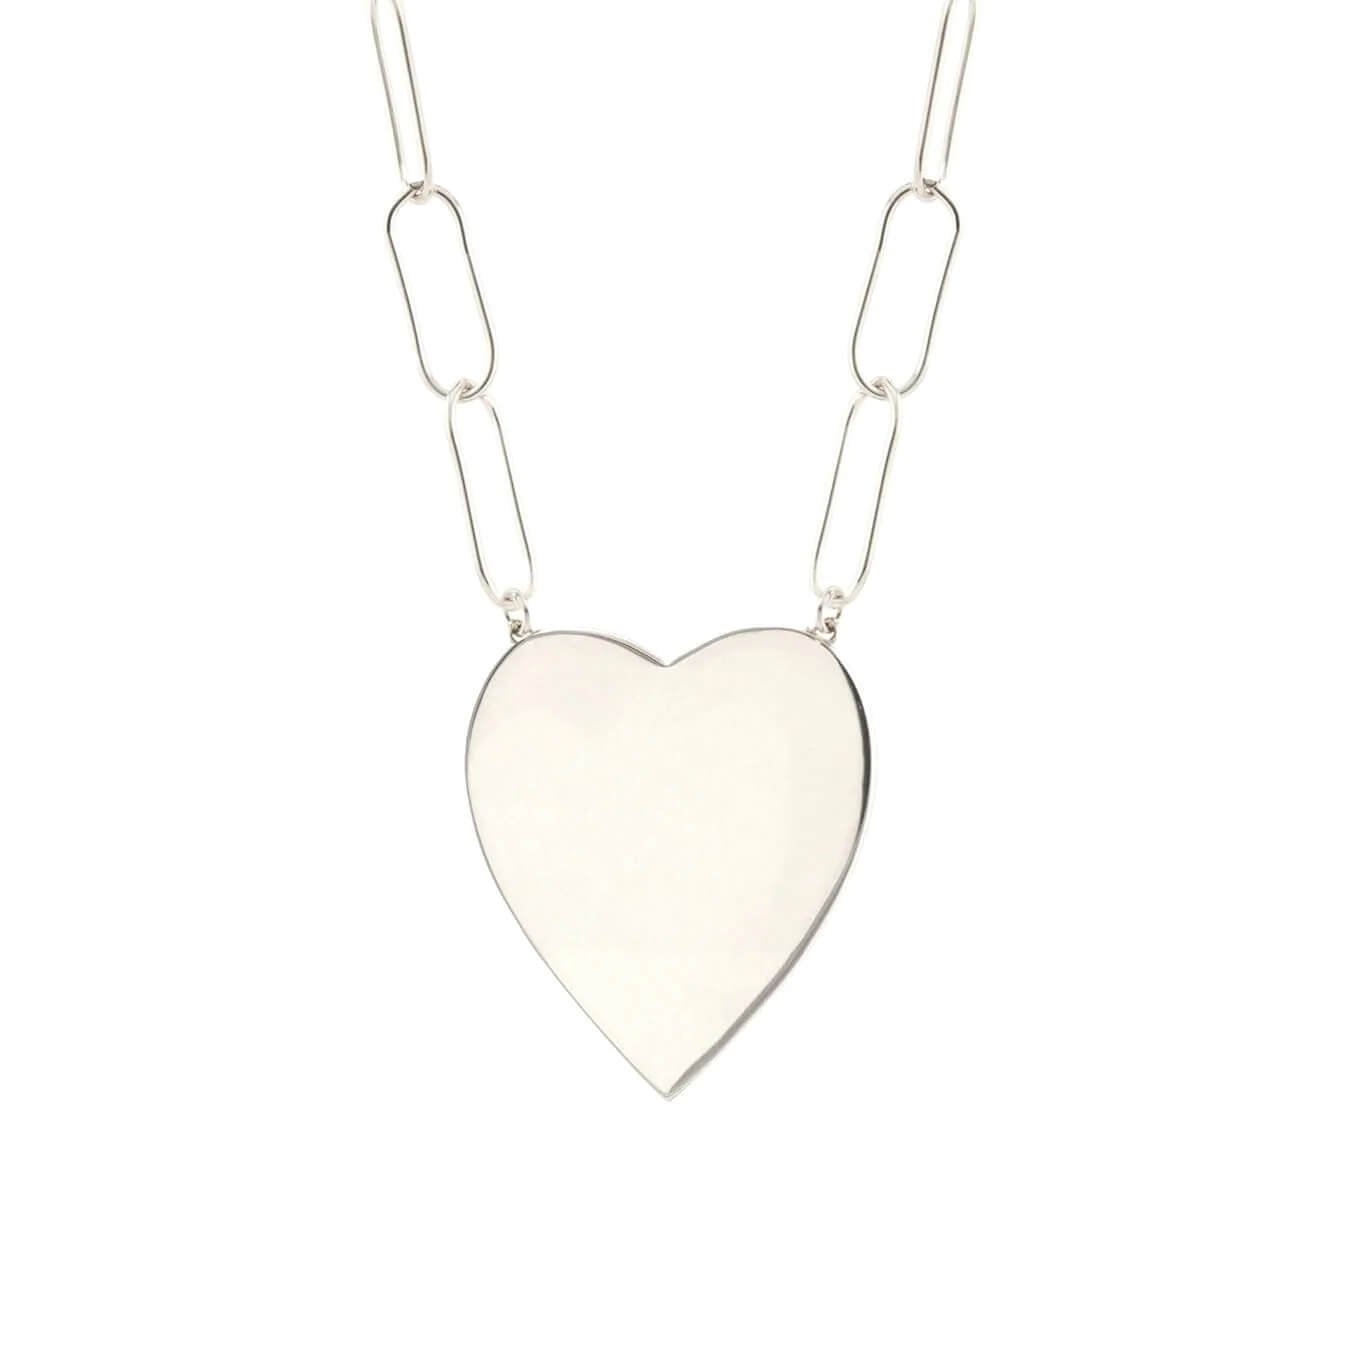 Kris Nations Large Heart Pendant on Large Link Chain, $140